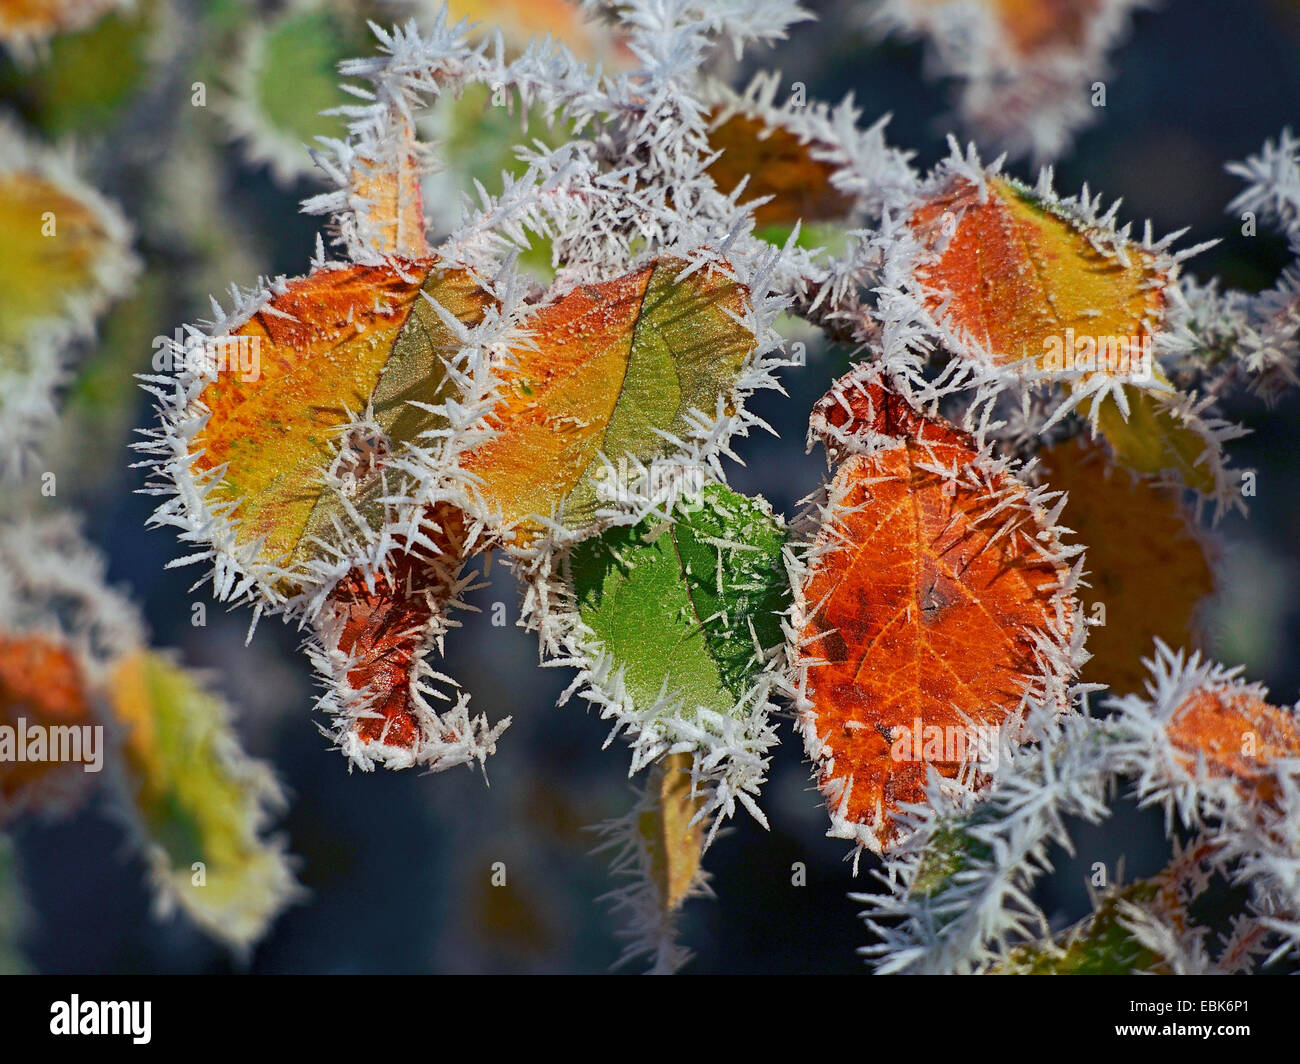 apple tree (Malus domestica), autumn leaves with hoar frost in backlight, Germany, Baden-Wuerttemberg Stock Photo